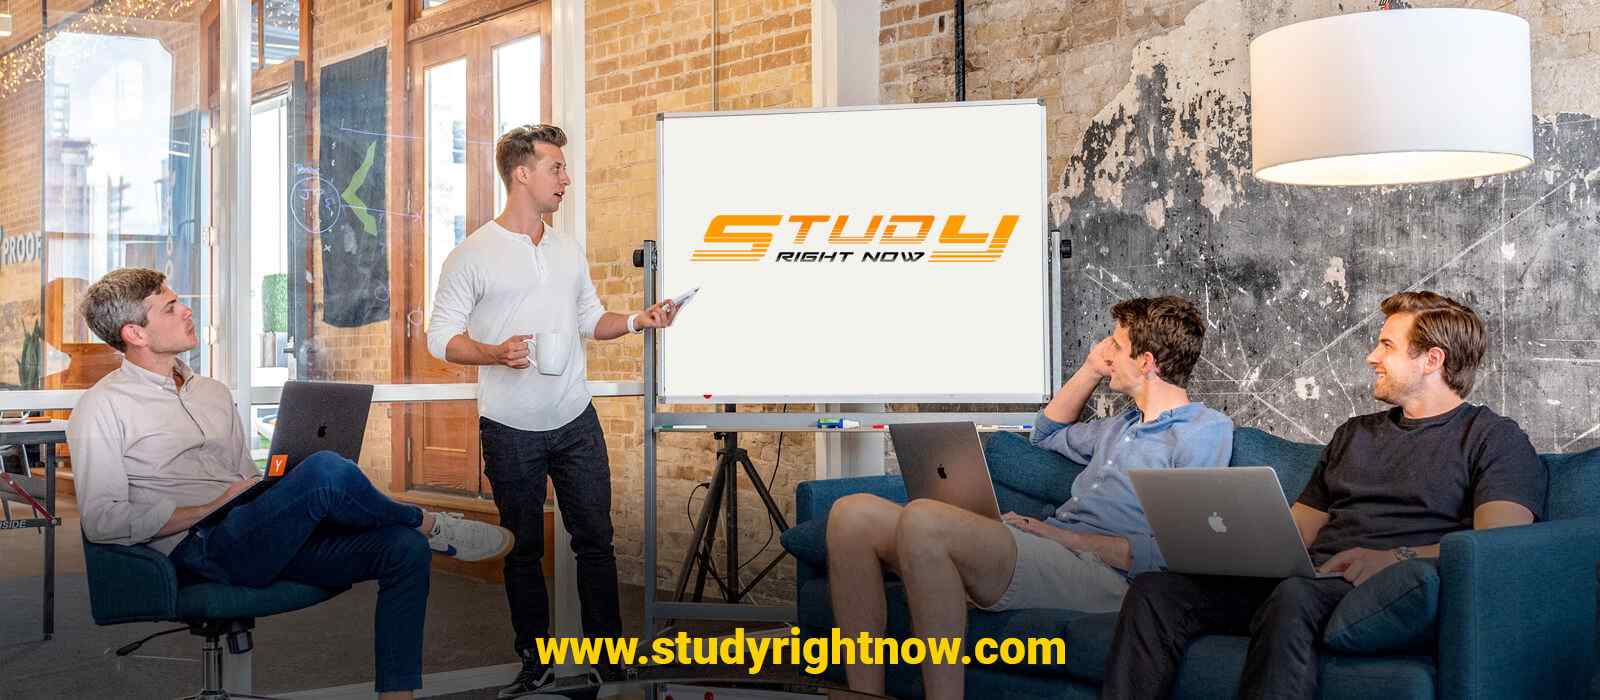 Studyrightnow is providing the best online tutorials for programming languages.